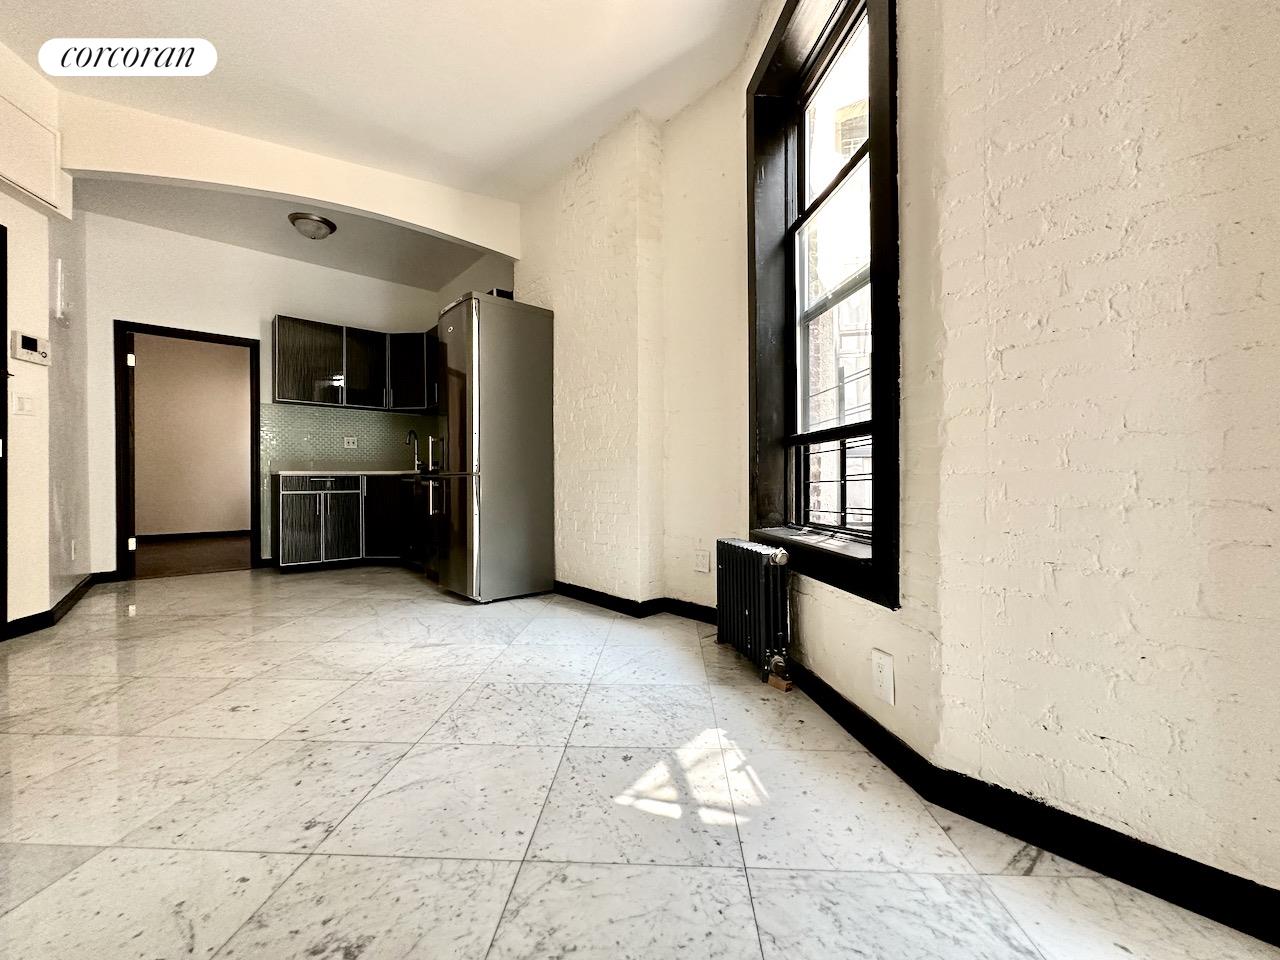 350 East 91st Street 20, Yorkville, Upper East Side, NYC - 2 Bedrooms  
1 Bathrooms  
4 Rooms - 